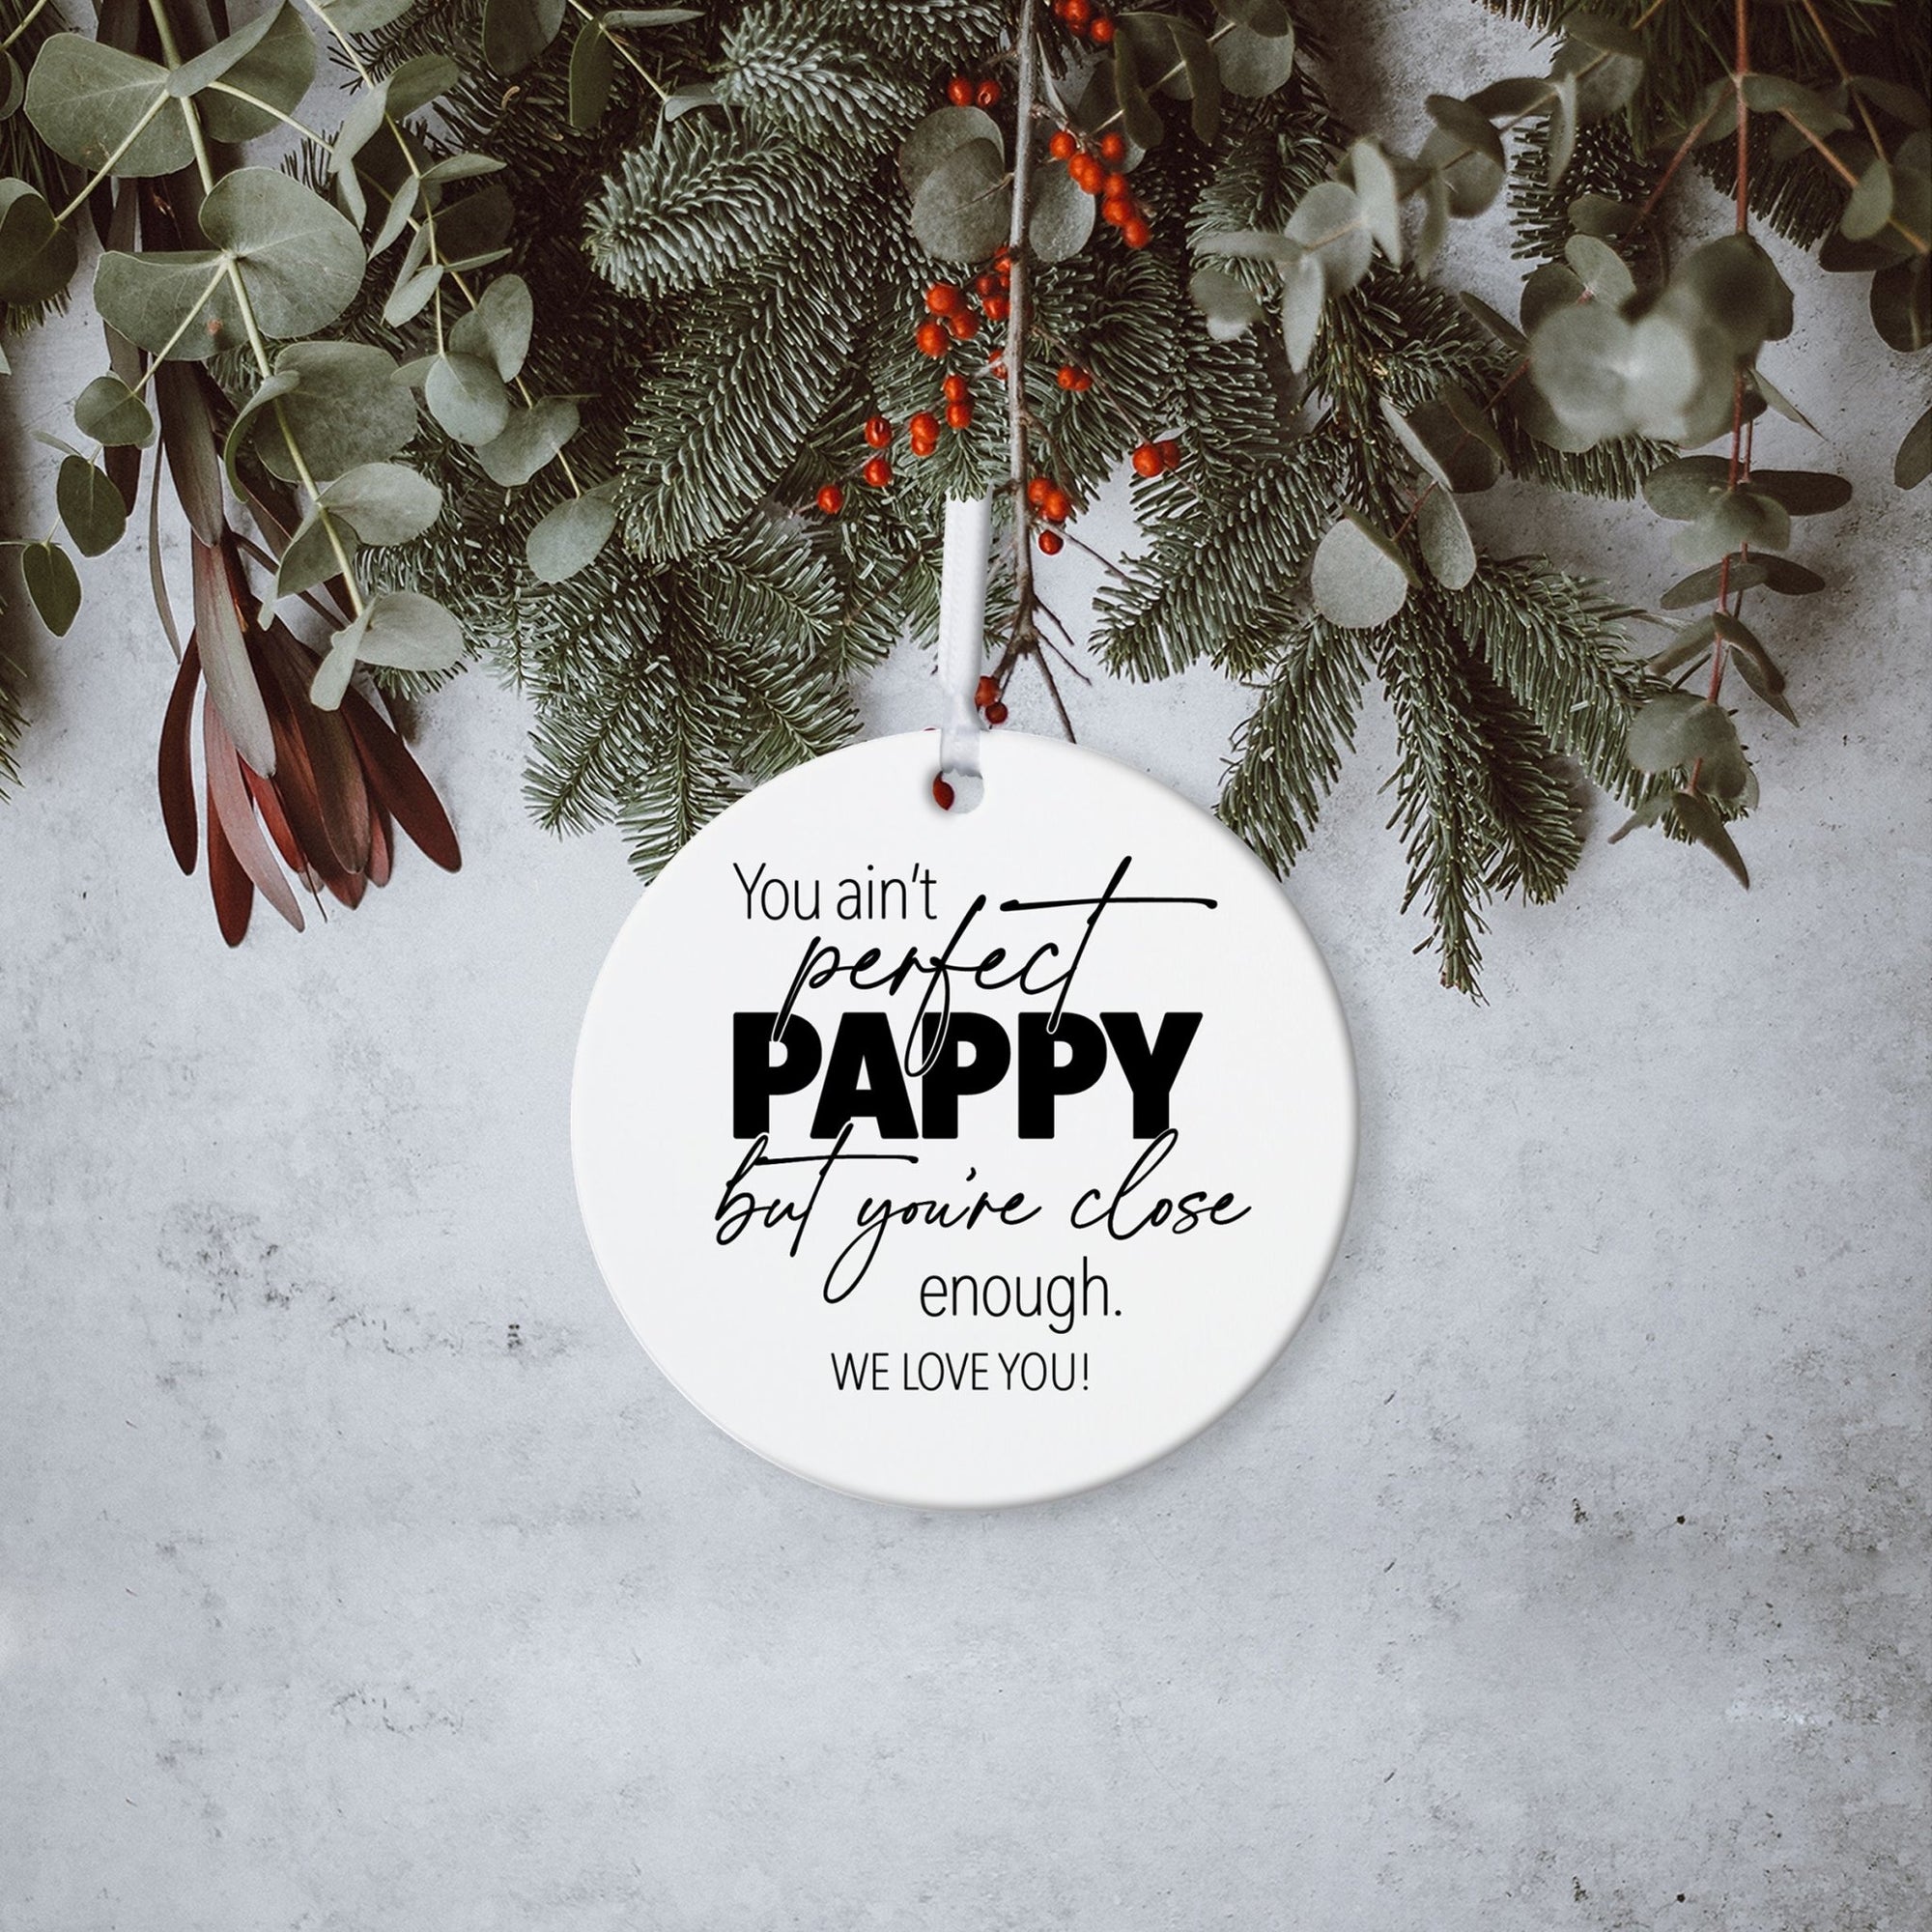 Grandparents White Ornament With Inspirational Message Gift Ideas - You Ain't Perfect Pappy